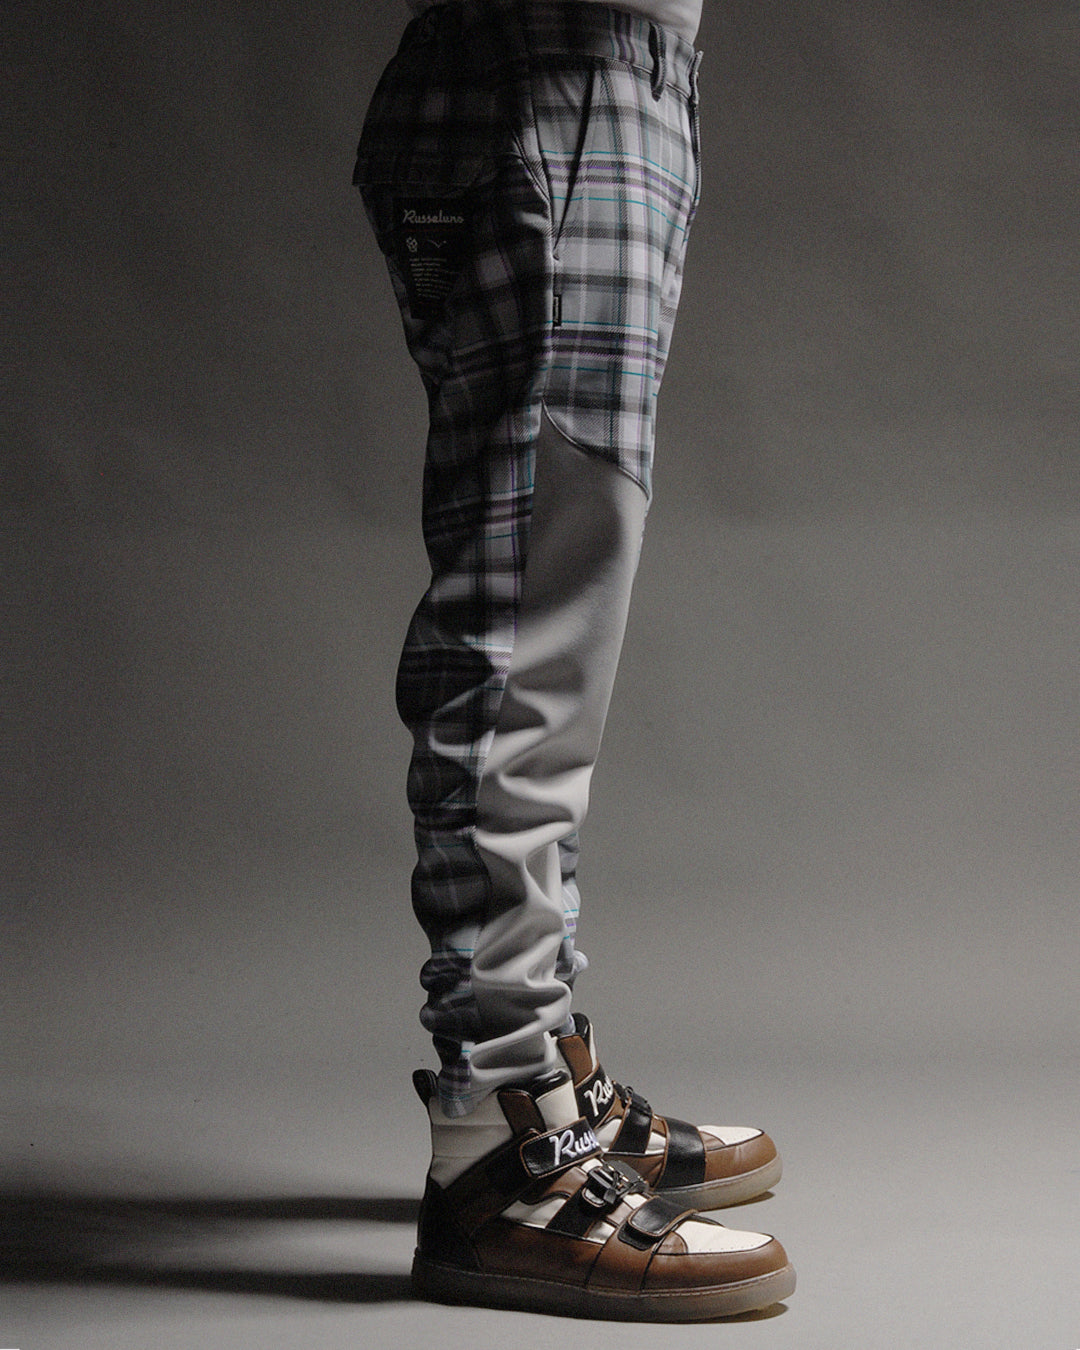 WIDE TAPERED WARM PANTS（CHECK)